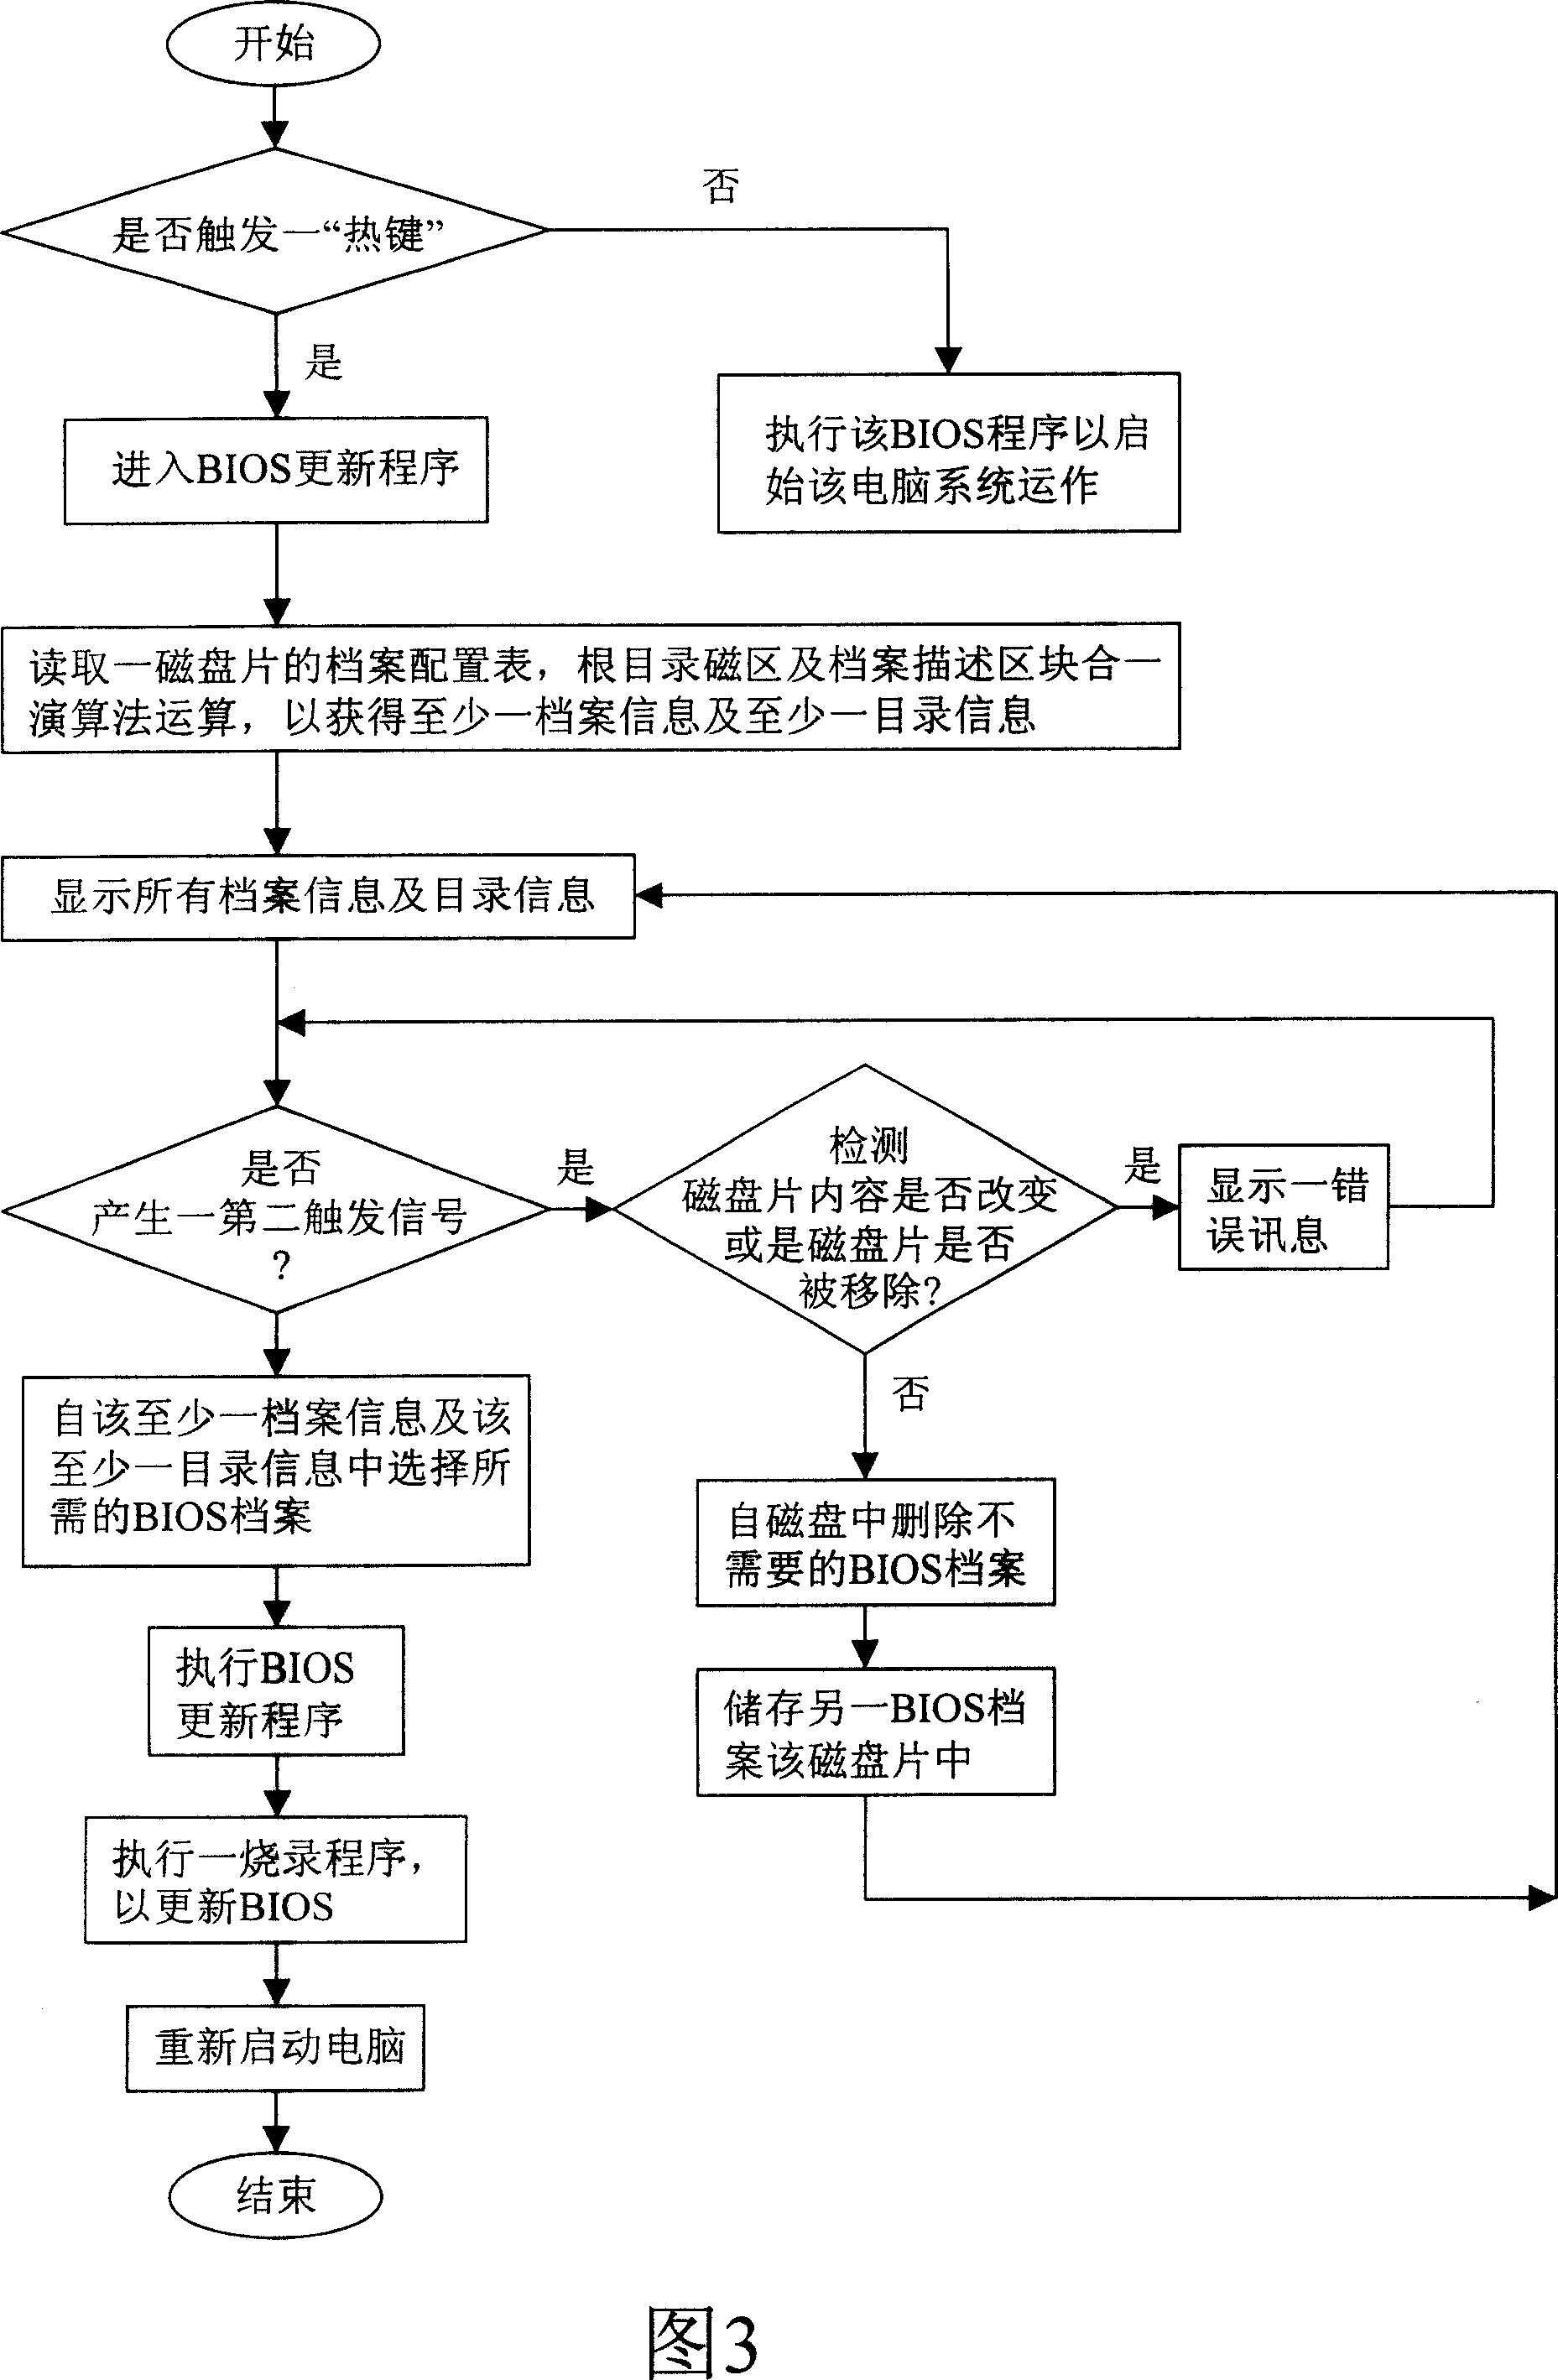 Method for displaying archival information and directory information in updating BIOS of computer system